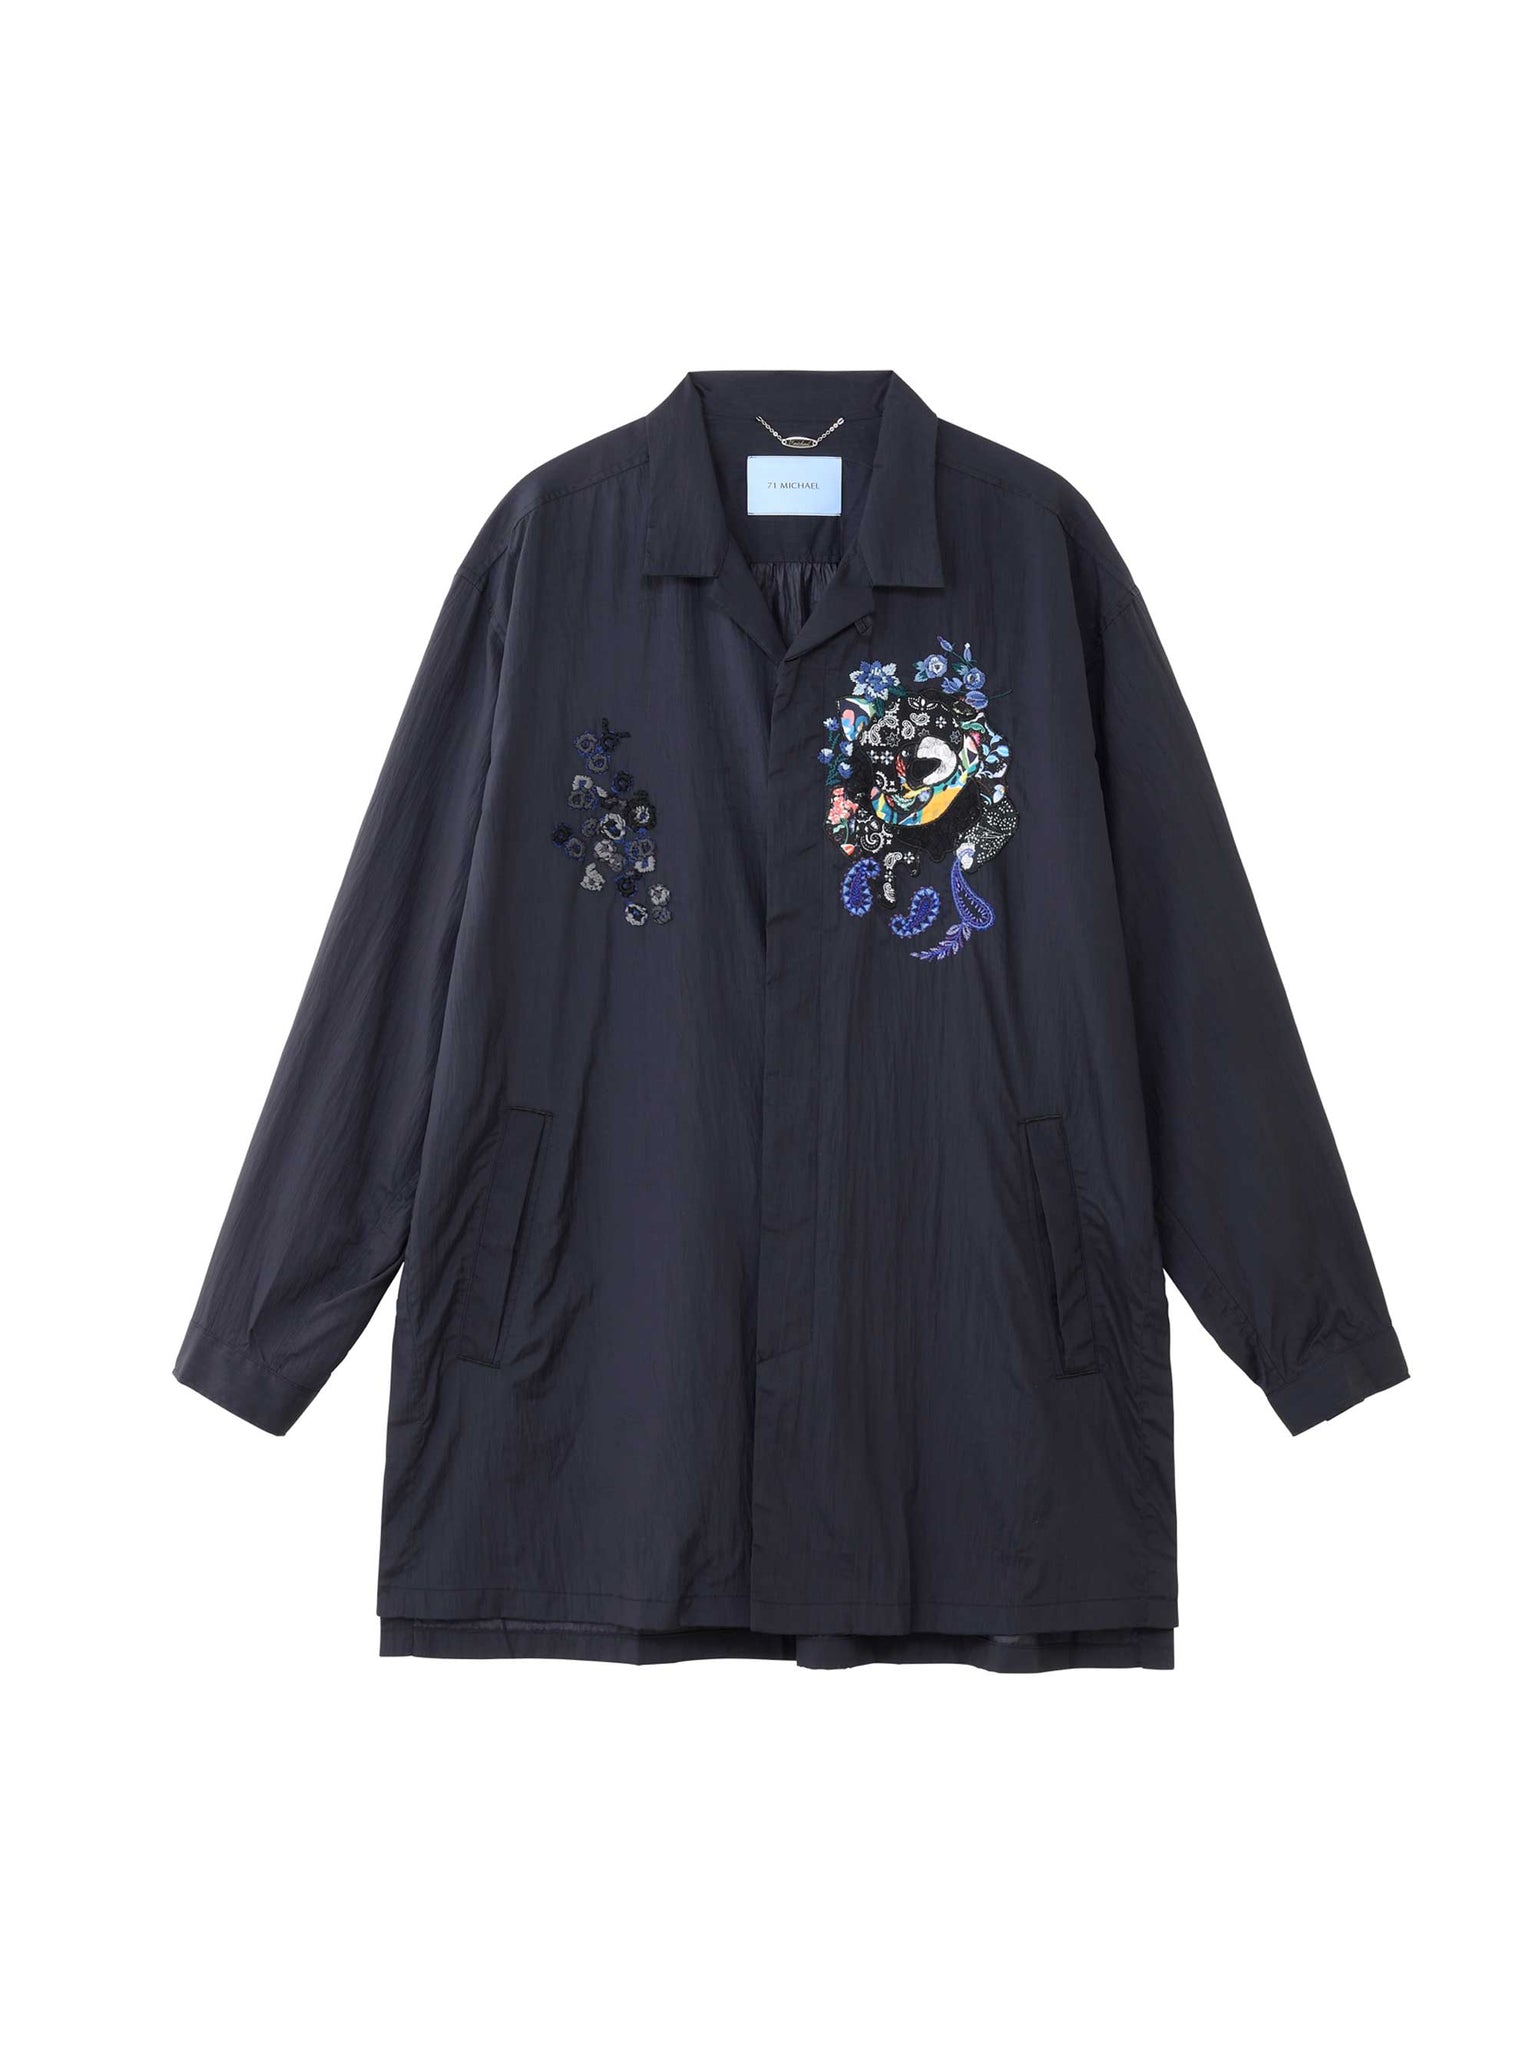 APPLIQUE / EMBROIDERED SHIRT COAT